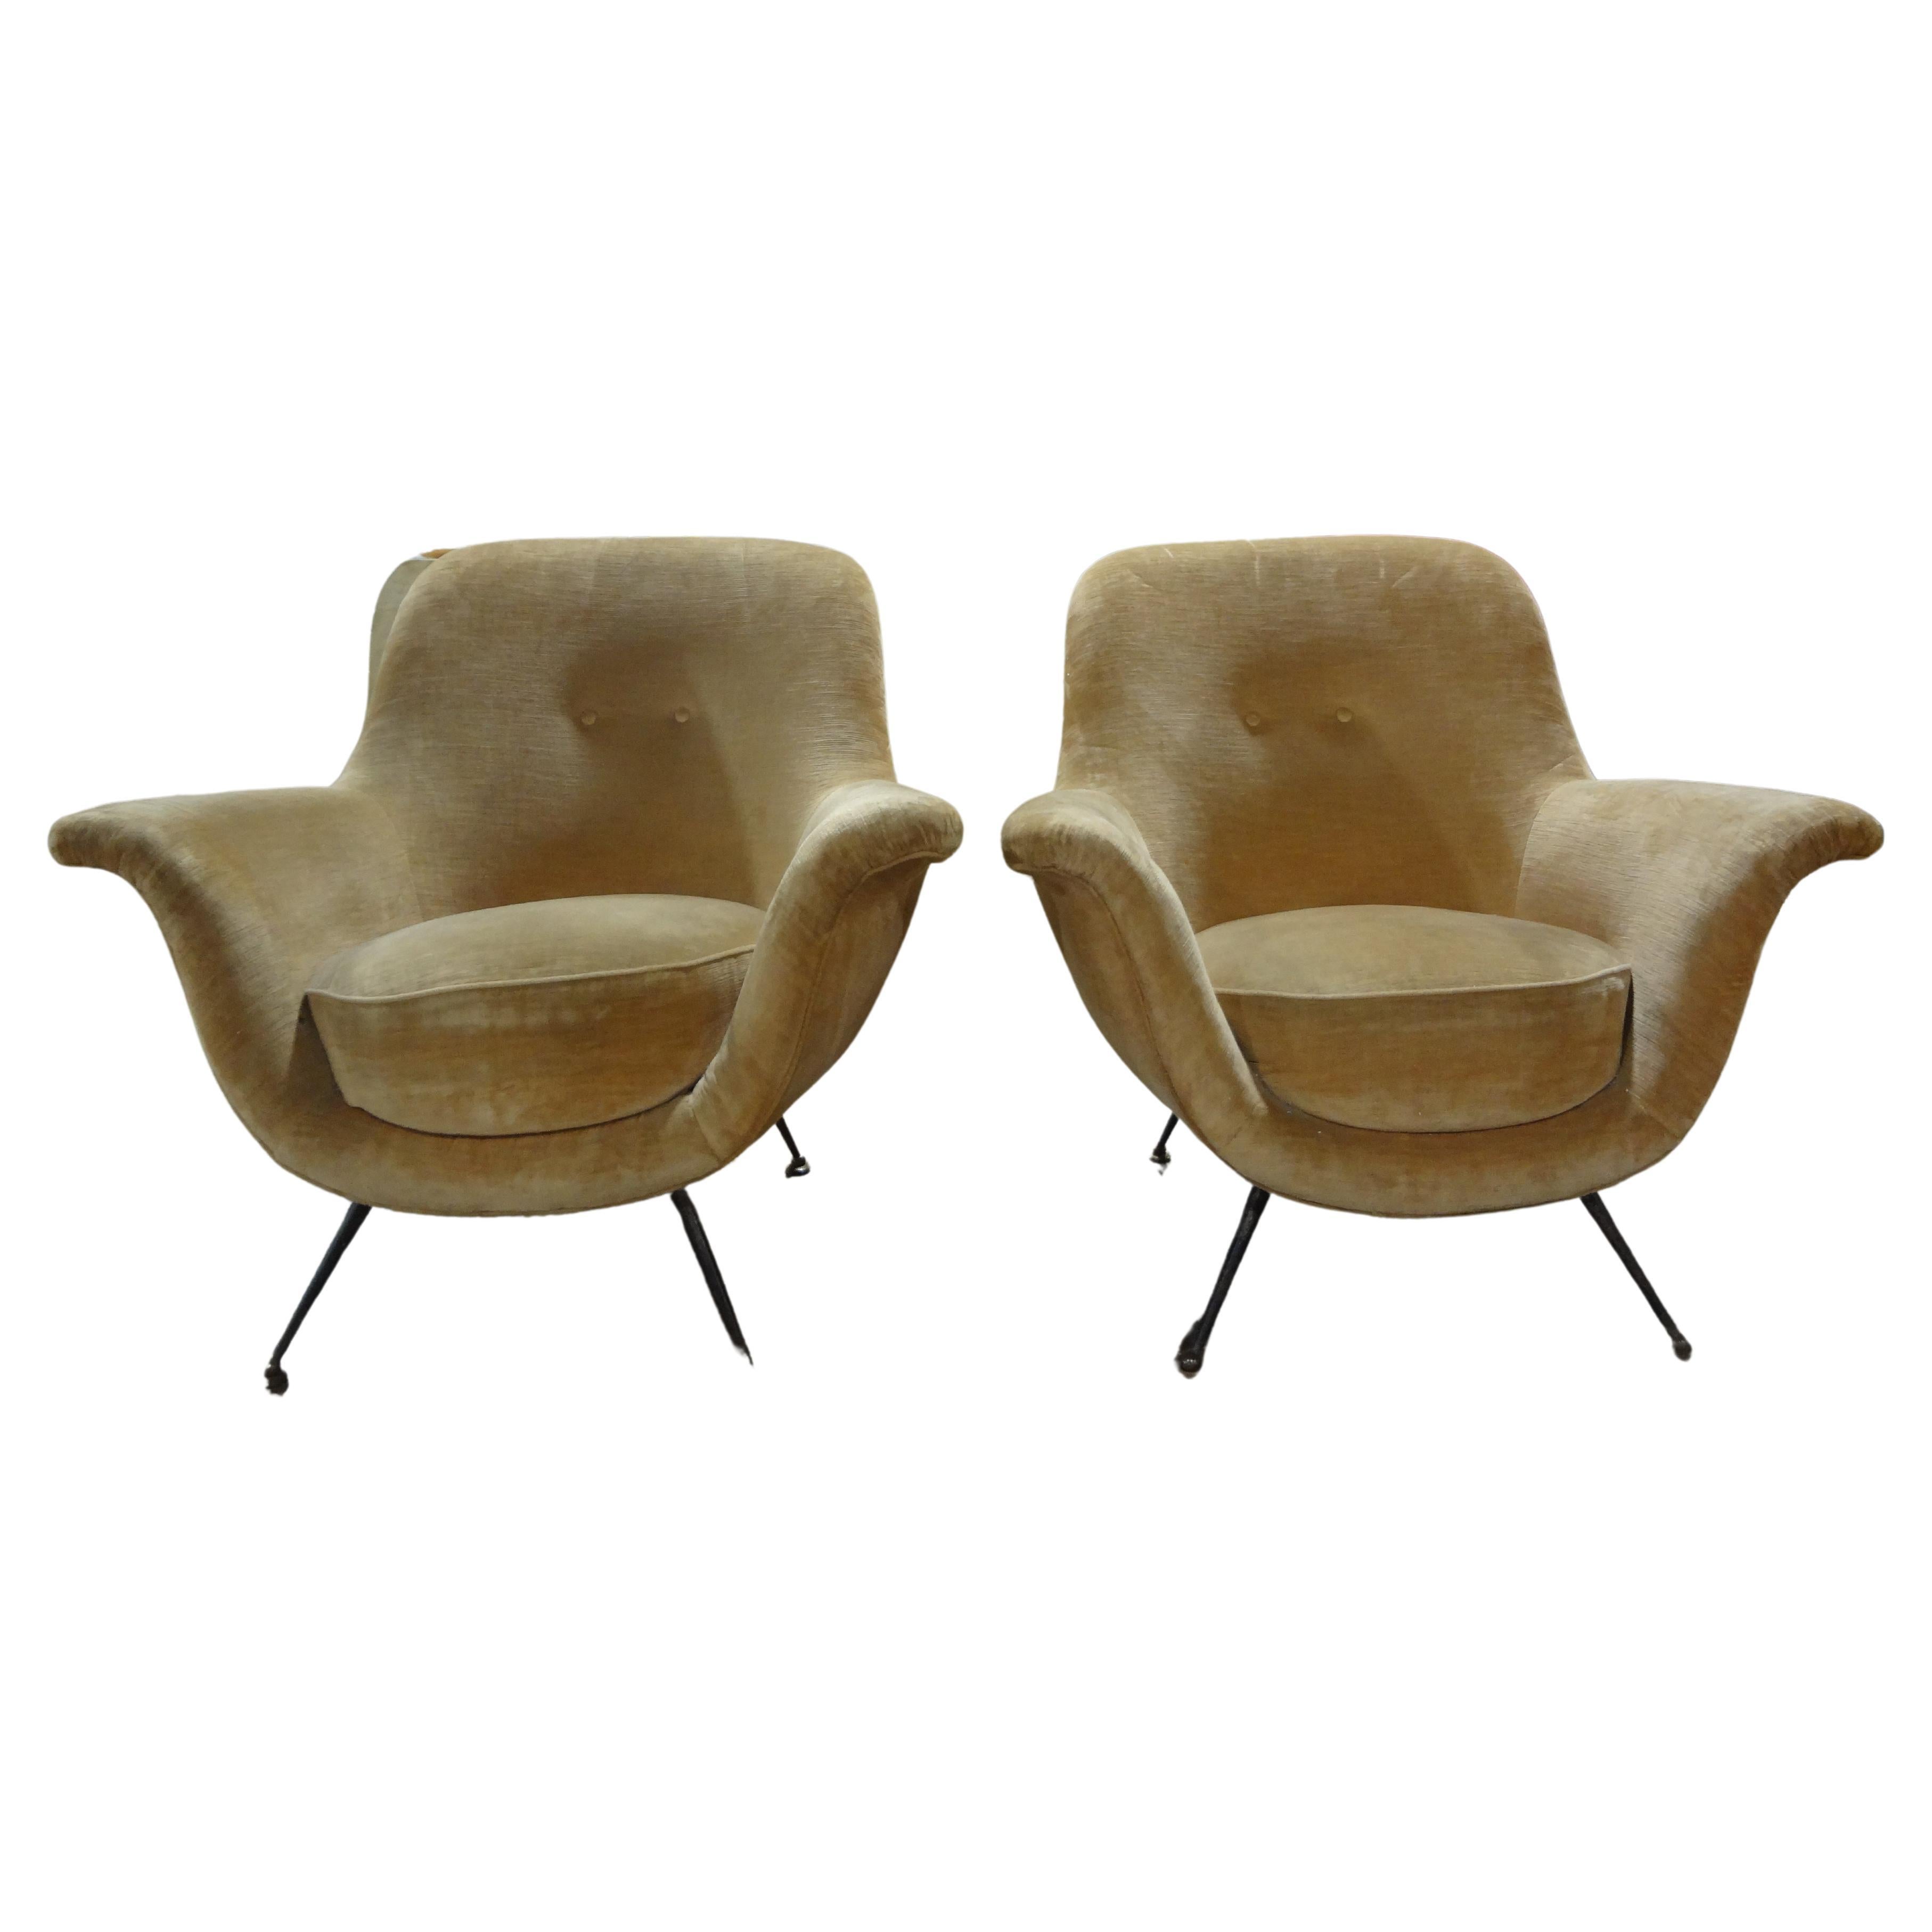 Pair Of Italian Modern Sculptural Lounge Chairs.
This lovely pair of mid century modern shapely lounge chairs, side chairs or occasional chairs with splayed legs are both stylish and comfortable. Upholstery is recent and usable or easily newly